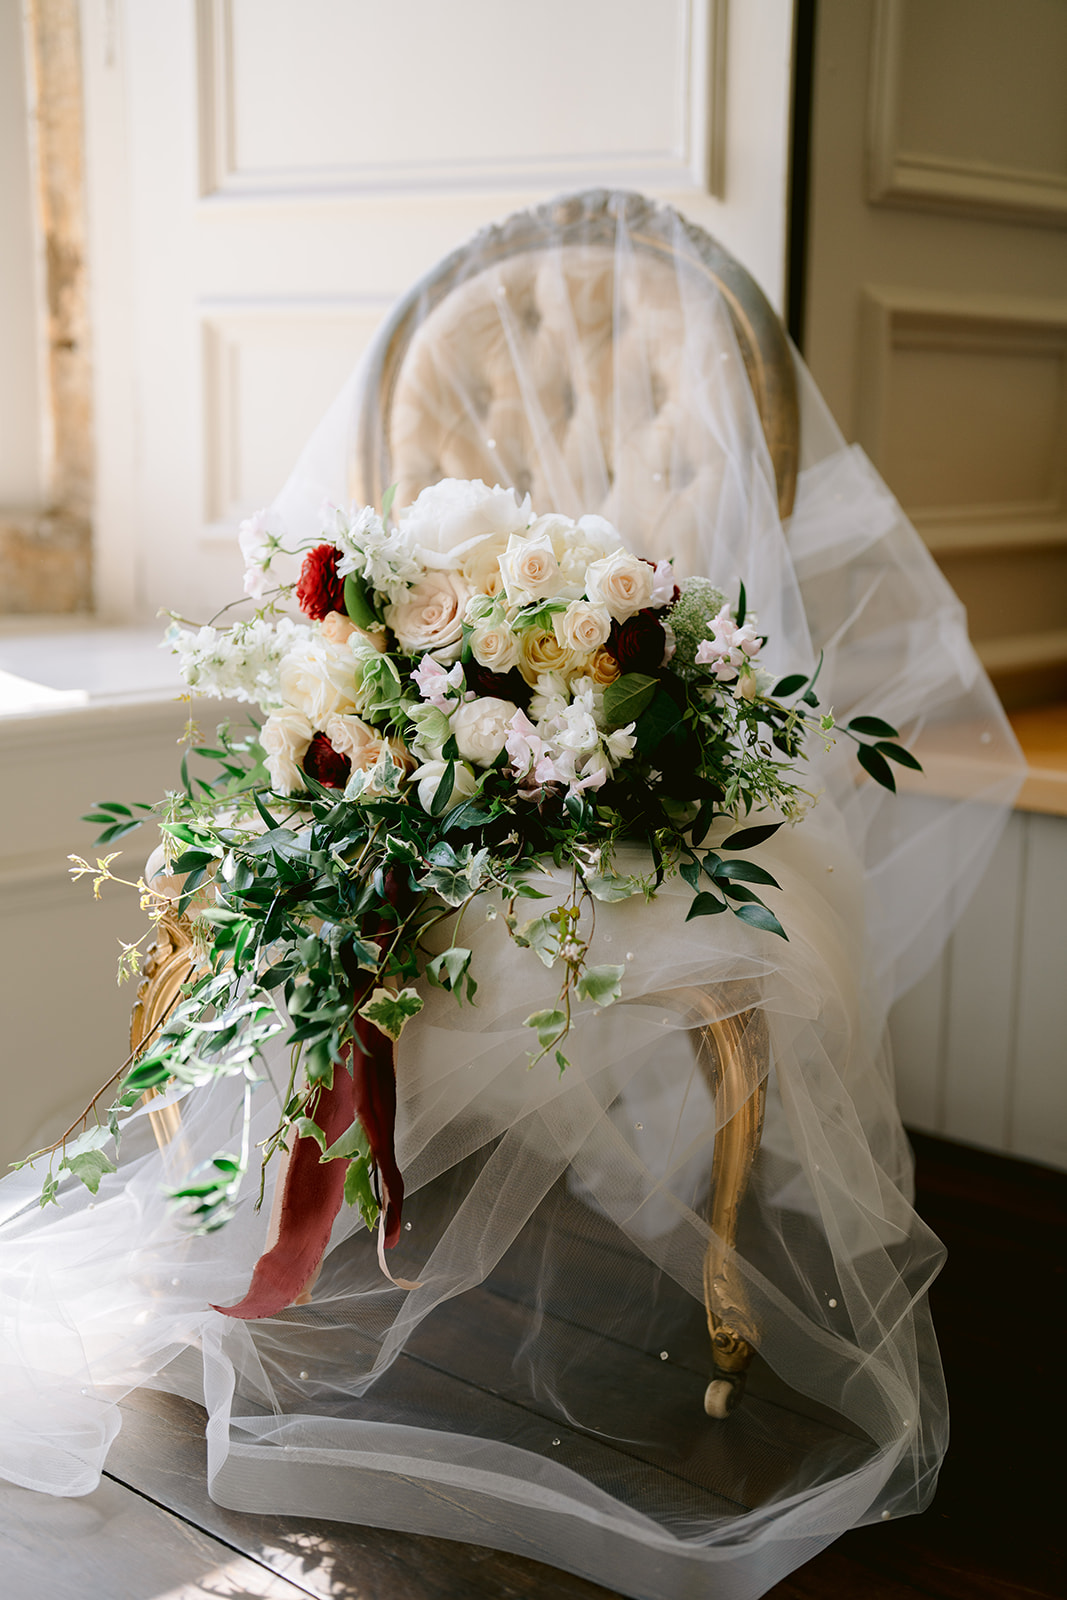 the wedding bouquet is on a vintage french chair and the wedding veil. The bouquet has roses camelia's and ivy ribbons